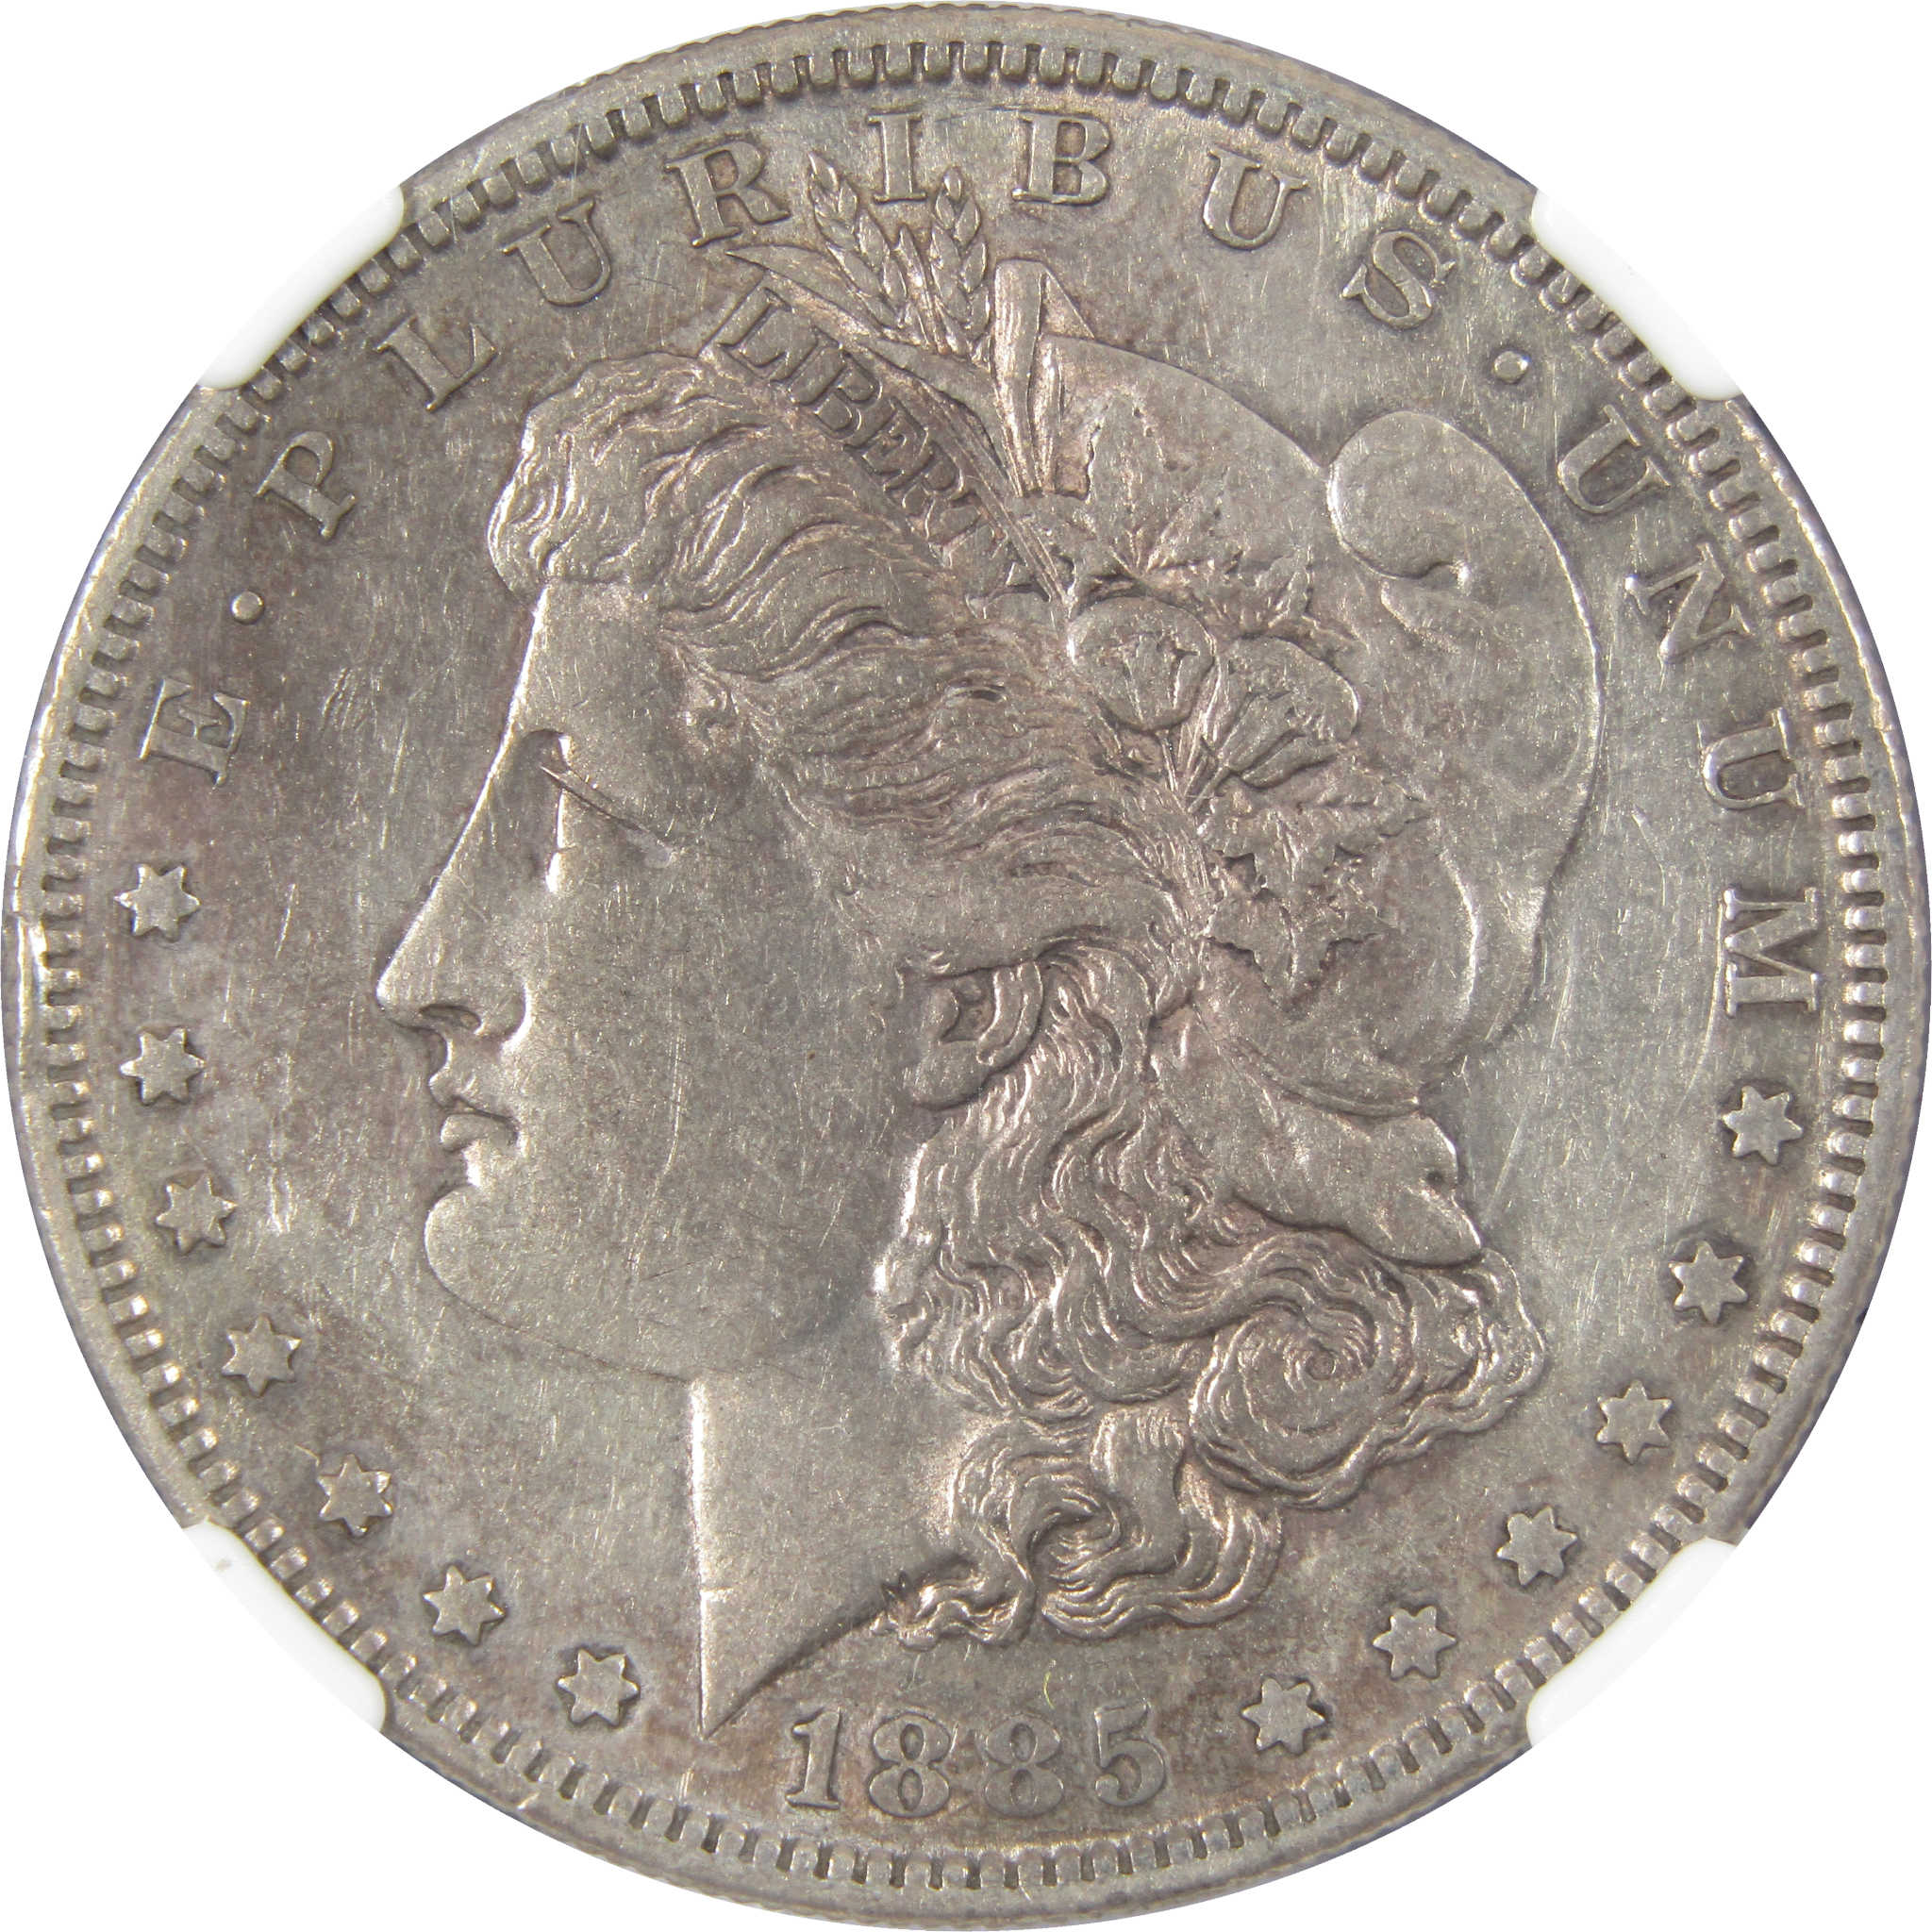 1885 S Morgan Dollar AU 53 NGC 90% Silver US Coin SKU:I1048 - Morgan coin - Morgan silver dollar - Morgan silver dollar for sale - Profile Coins &amp; Collectibles